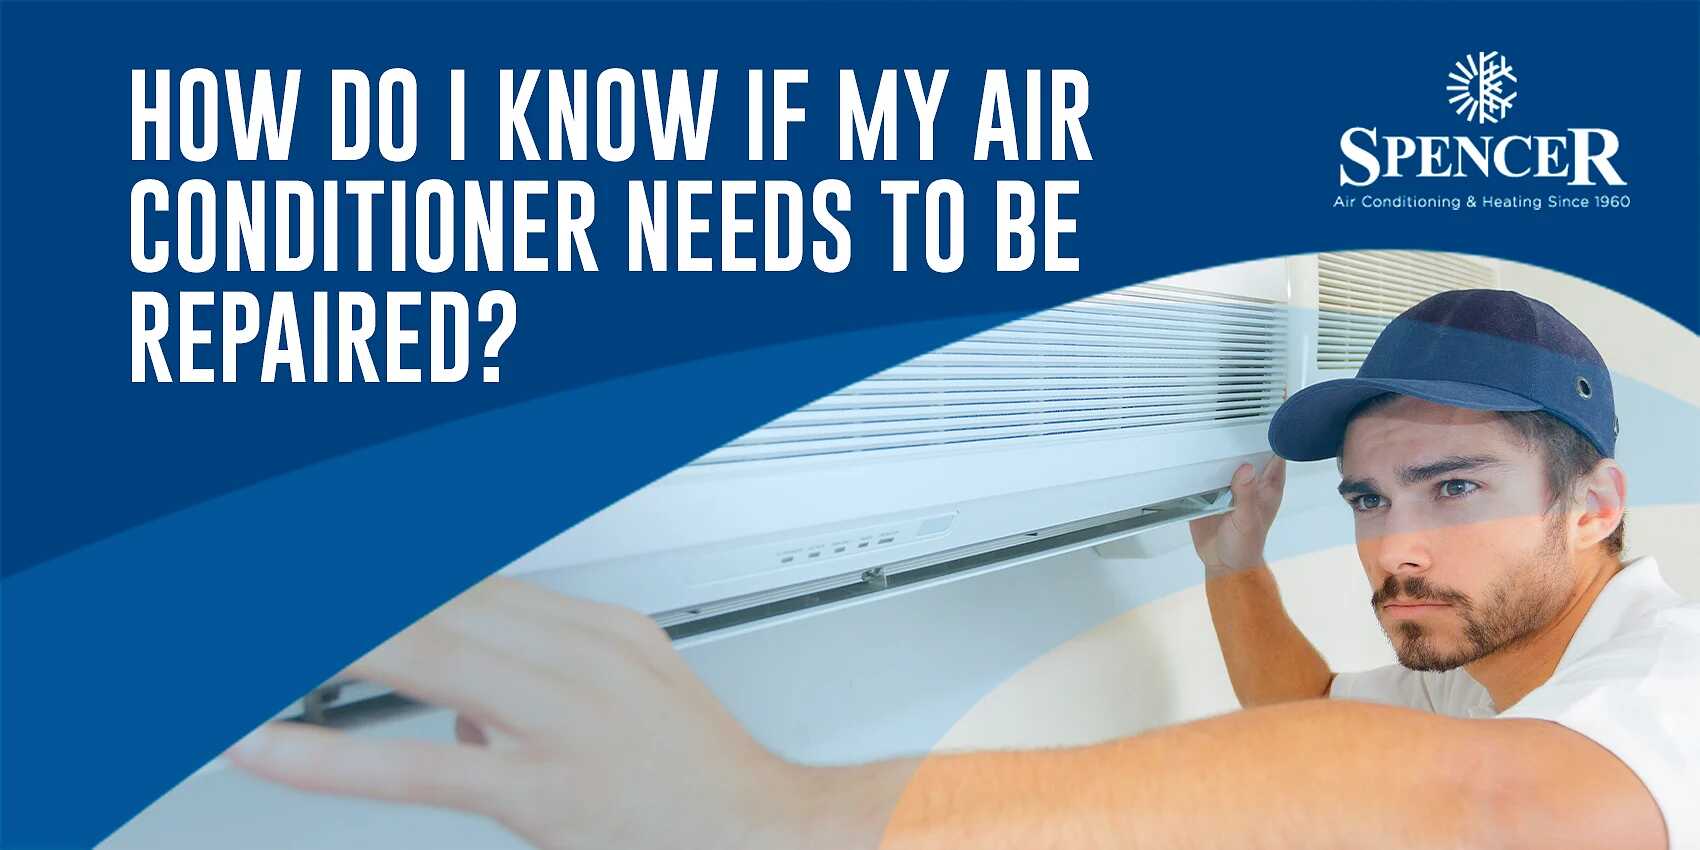 spencer how do I know if my ac needs to be repaired?